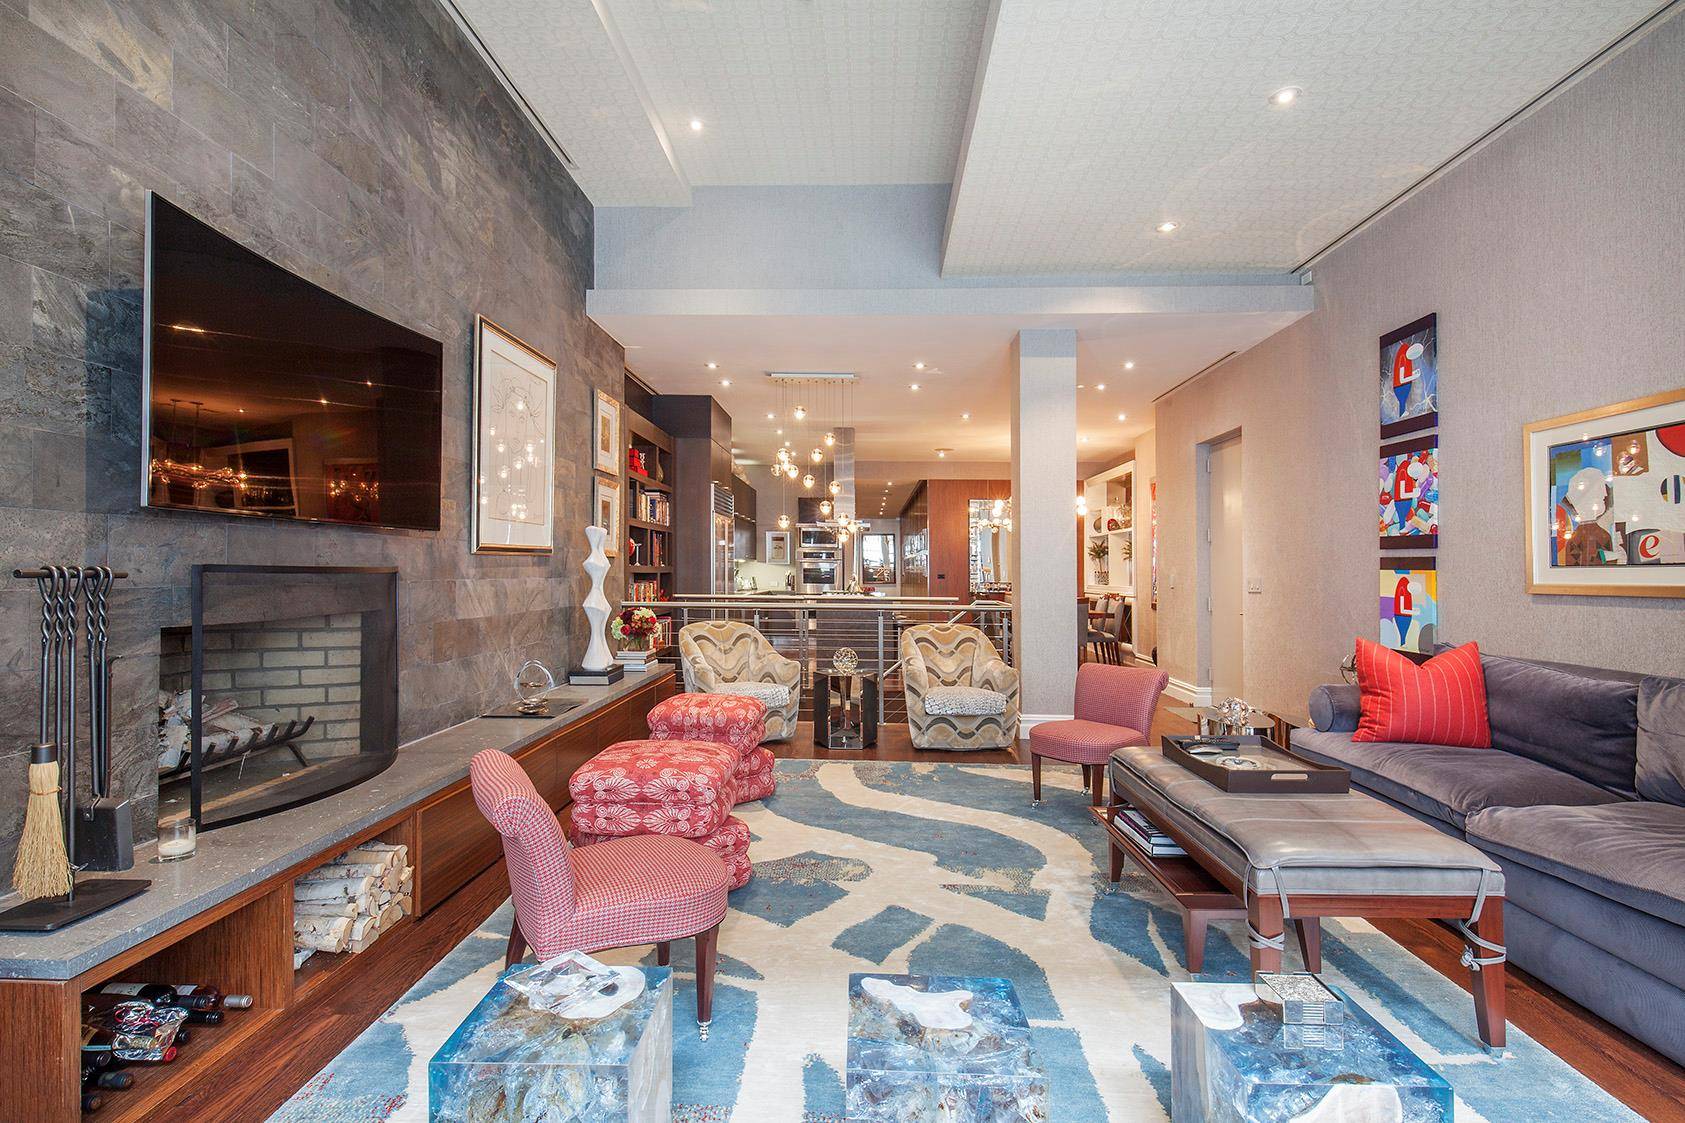 If you are looking for the ULTIMATE LIVE WORK HOME in MANHATTAN, this is it.